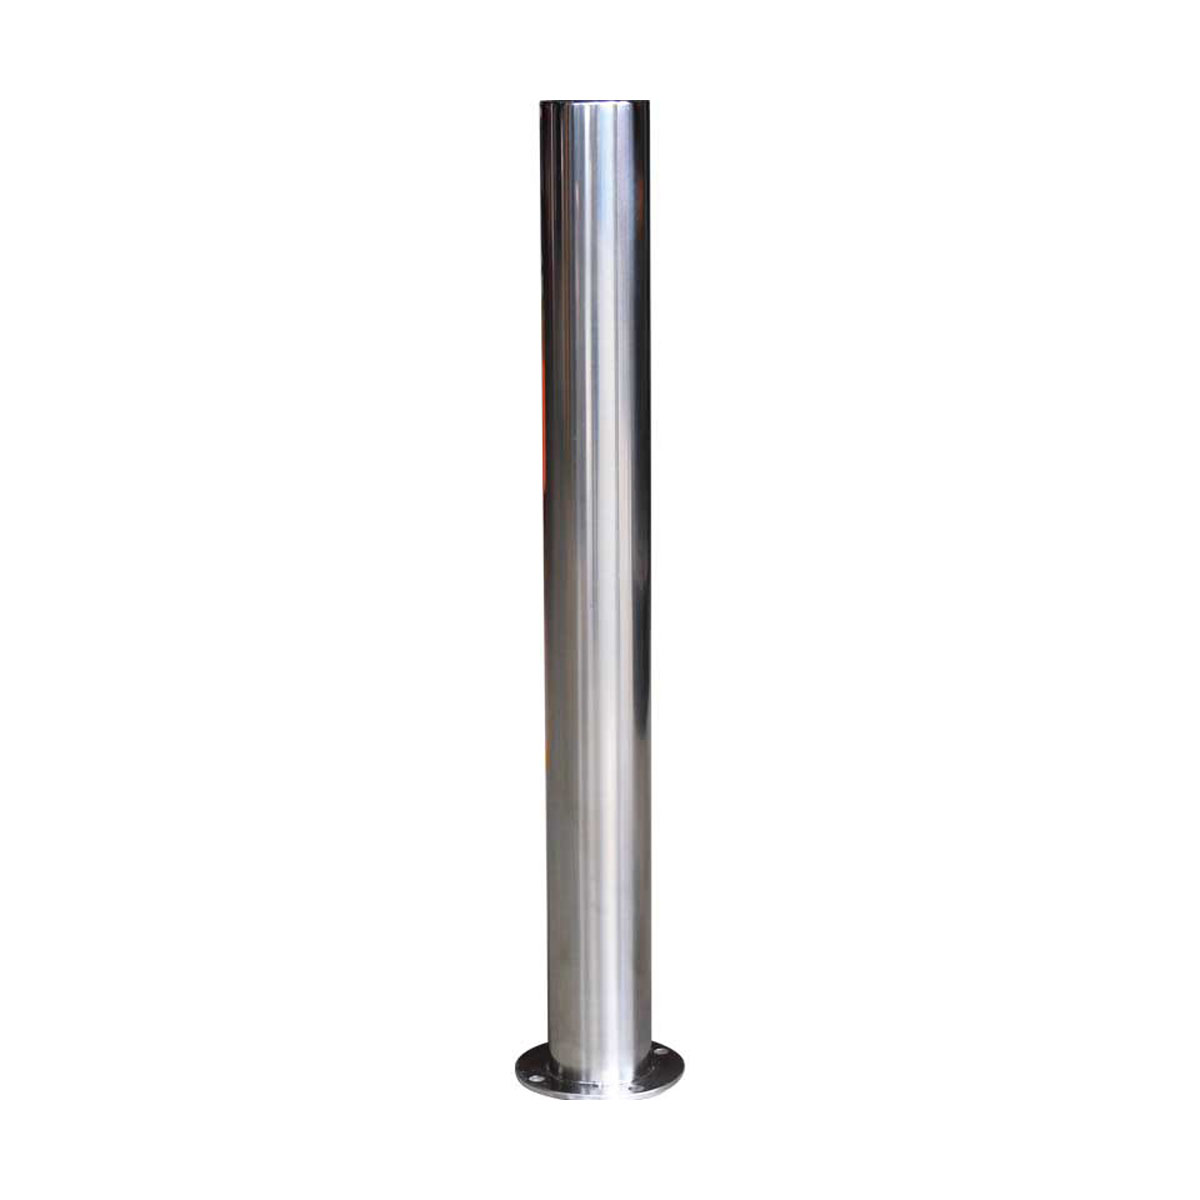 Buy Bolt-down Bollard (Stainless Steel) in Bolt-down Bollards from GuardX available at Astrolift NZ